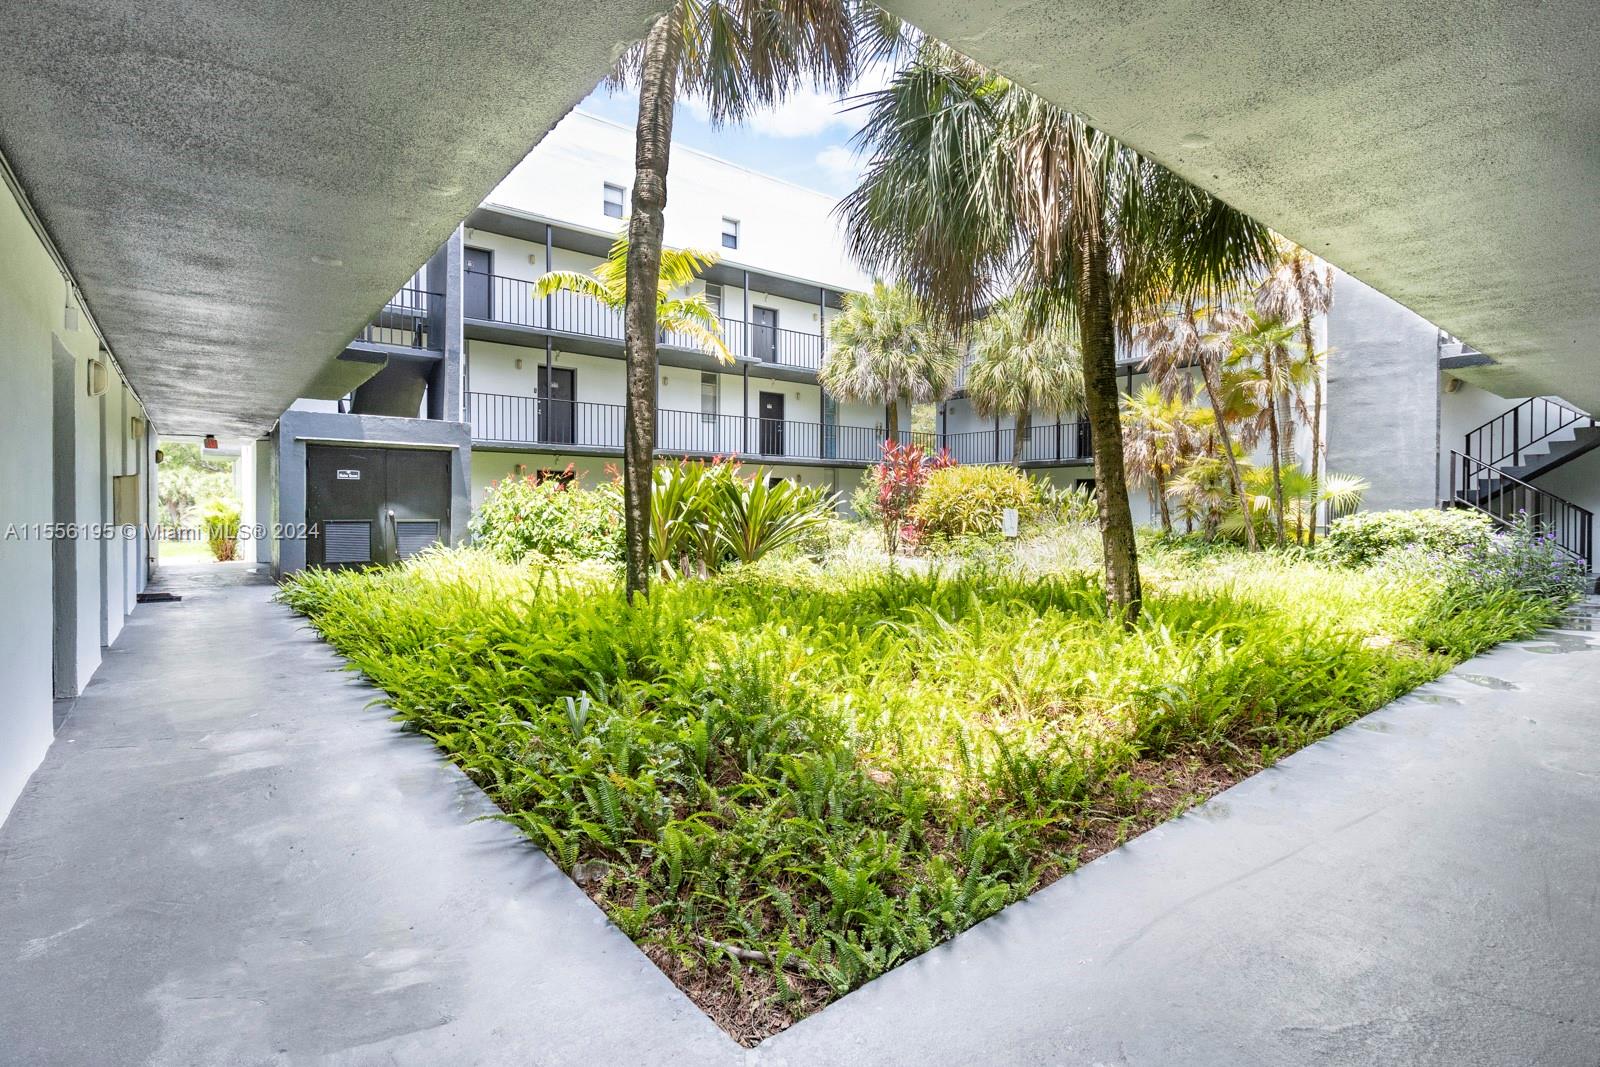 2930 Forest Hills Blvd B3P, Coral Springs, Florida 33065, 1 Bedroom Bedrooms, ,1 BathroomBathrooms,Residentiallease,For Rent,2930 Forest Hills Blvd B3P,A11556195